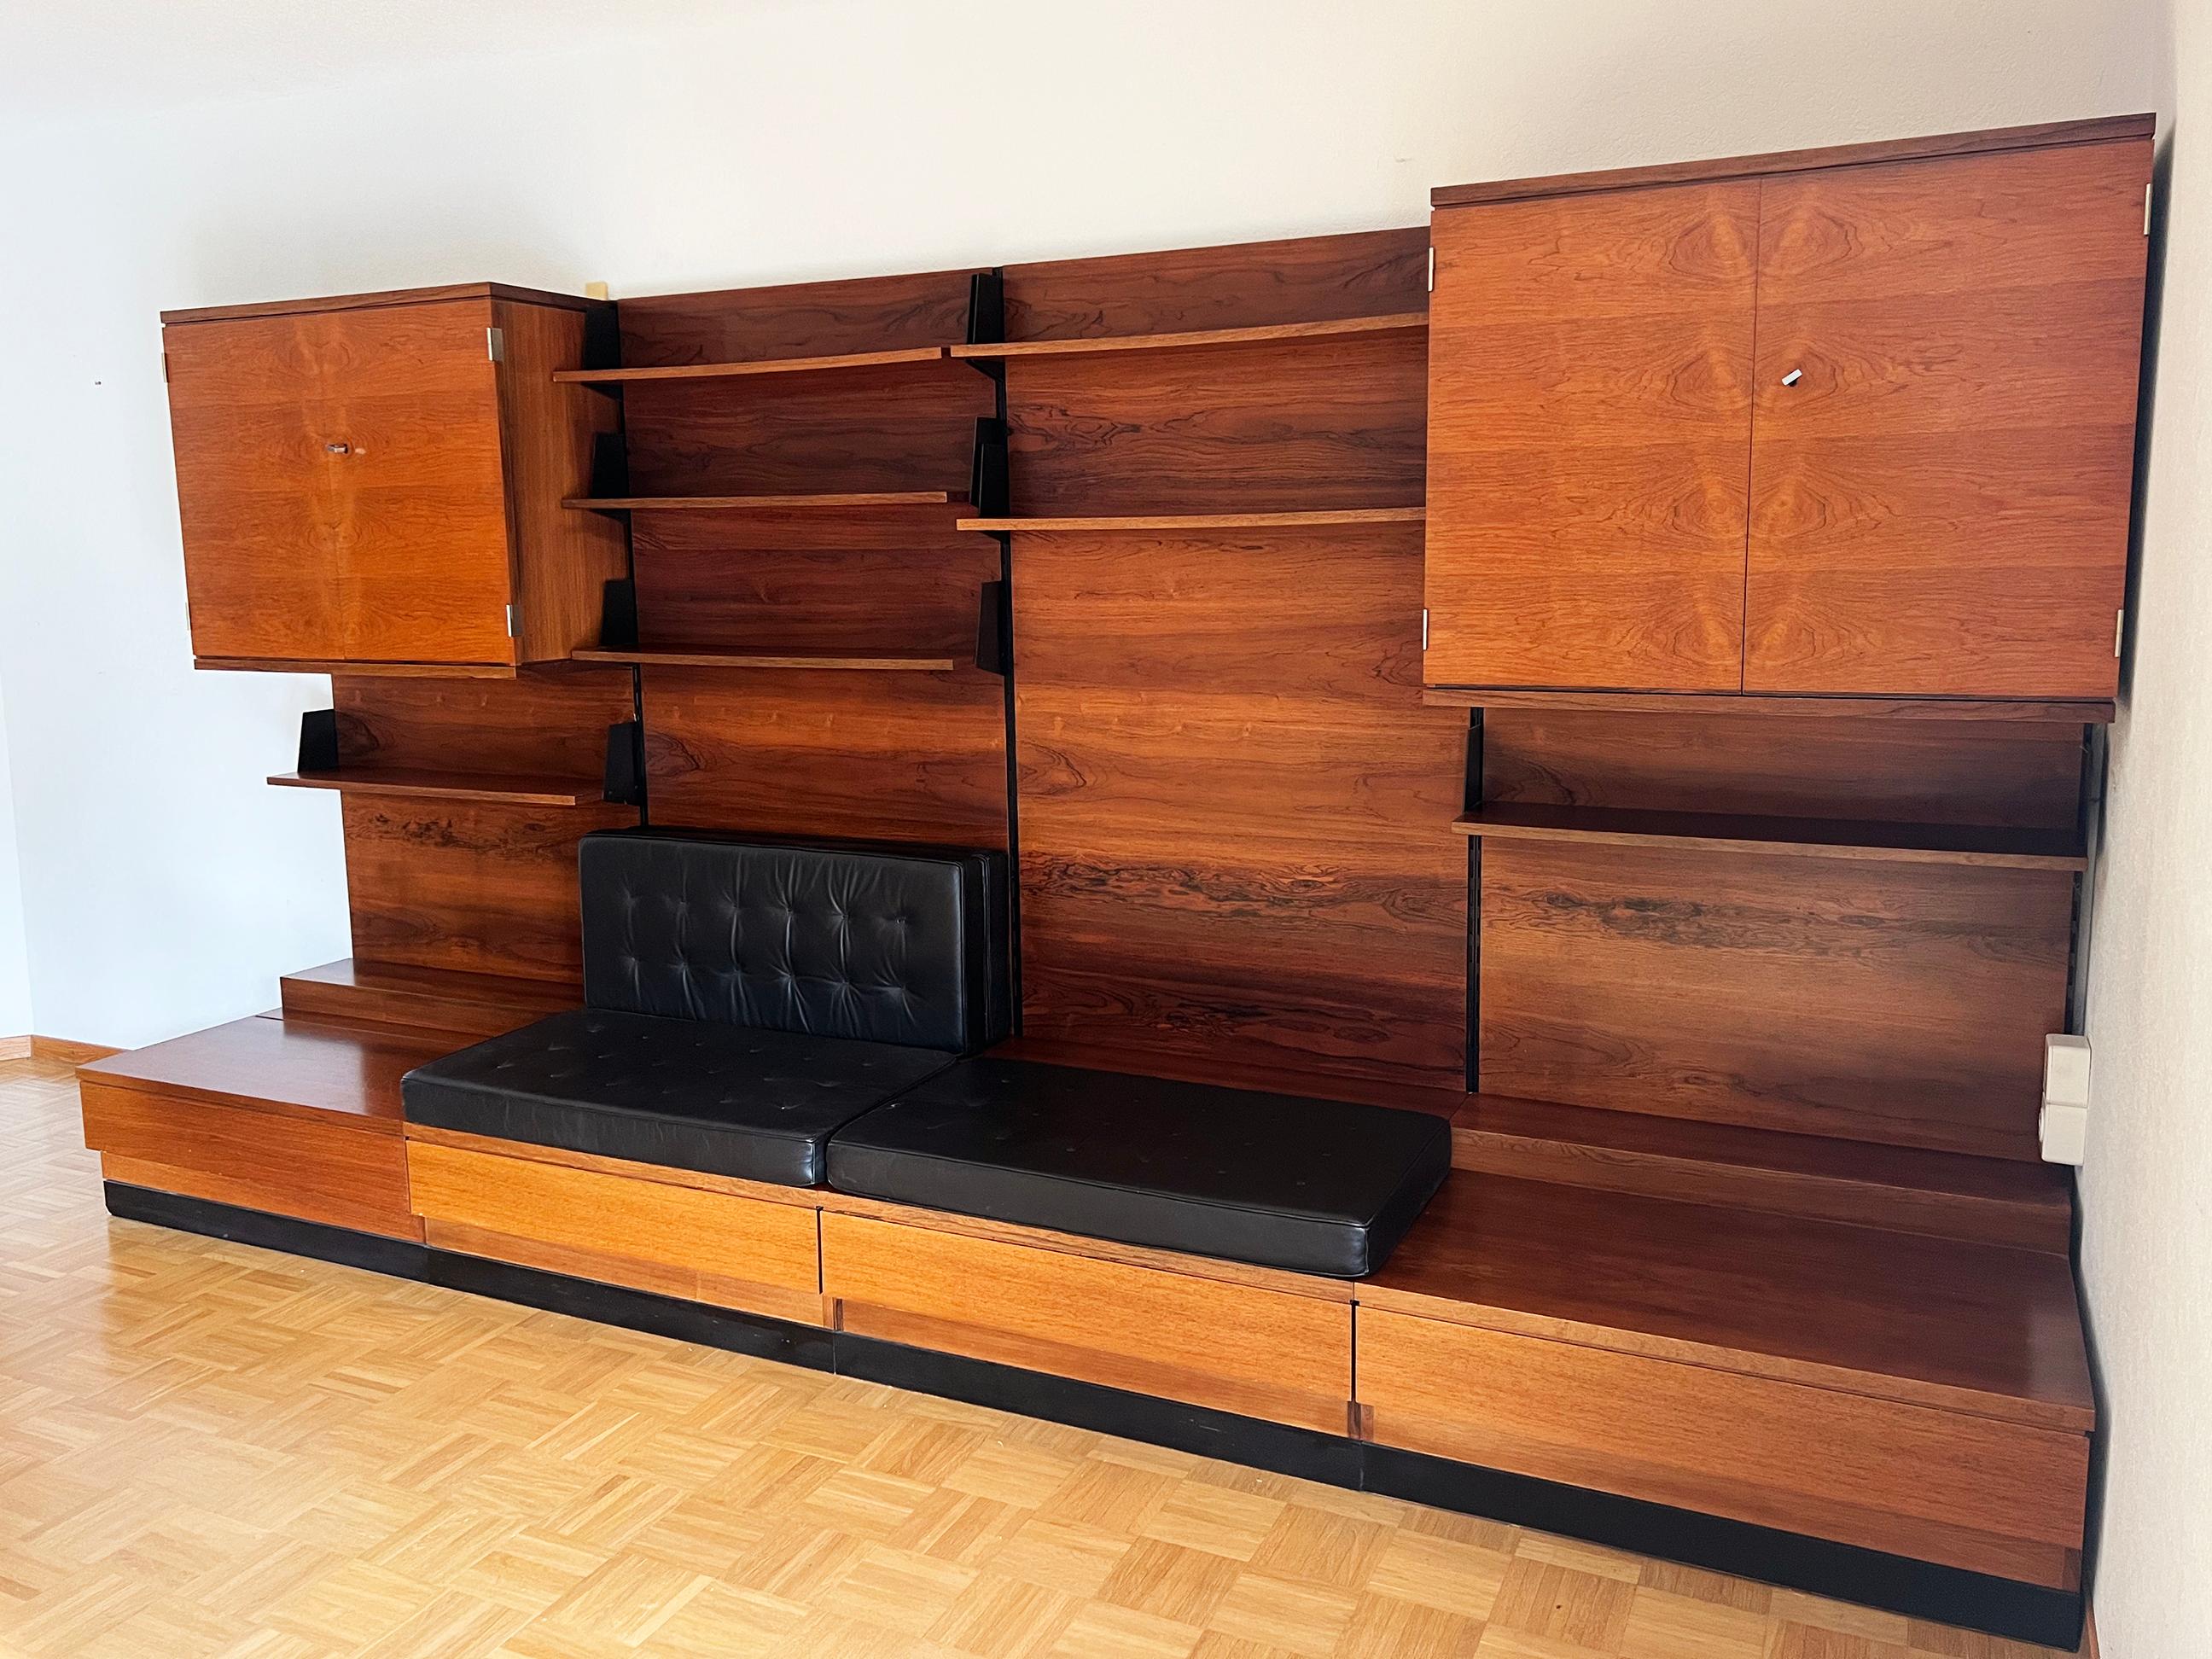 Priced for the entire set! Truly a one-of-a-kind and extremely rare piece.

This is a truly incredible, one-of-a-kind modular teak wall system that can be customized, and set up however you would like! There are four panels, onto which shelving and